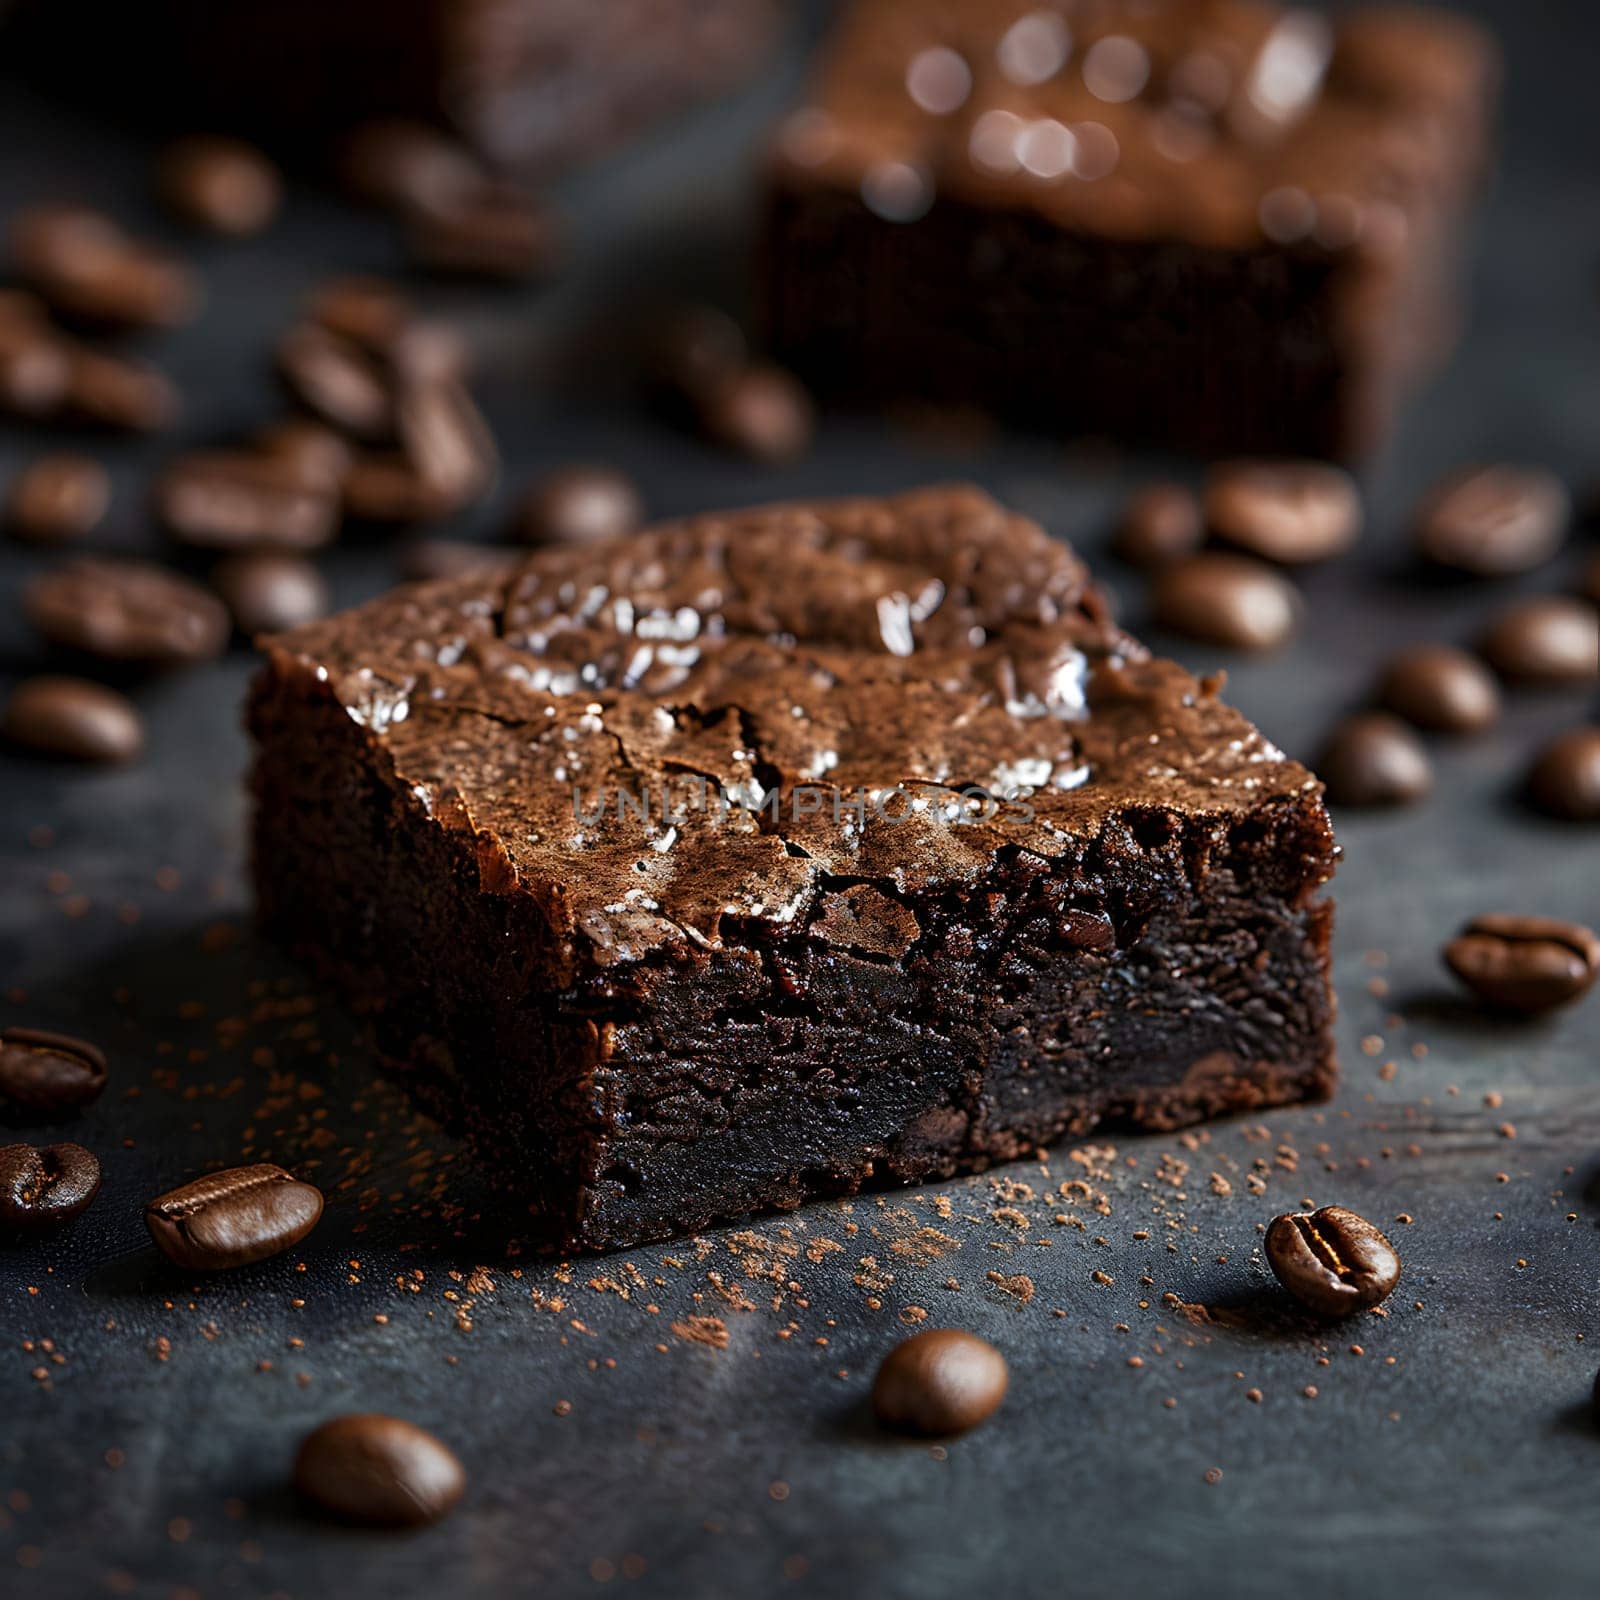 A brownie, a type of baked goods, is placed on a table surrounded by coffee beans. The food item is a glutenfree dessert made with ingredients like cocoa, sugar, and flour